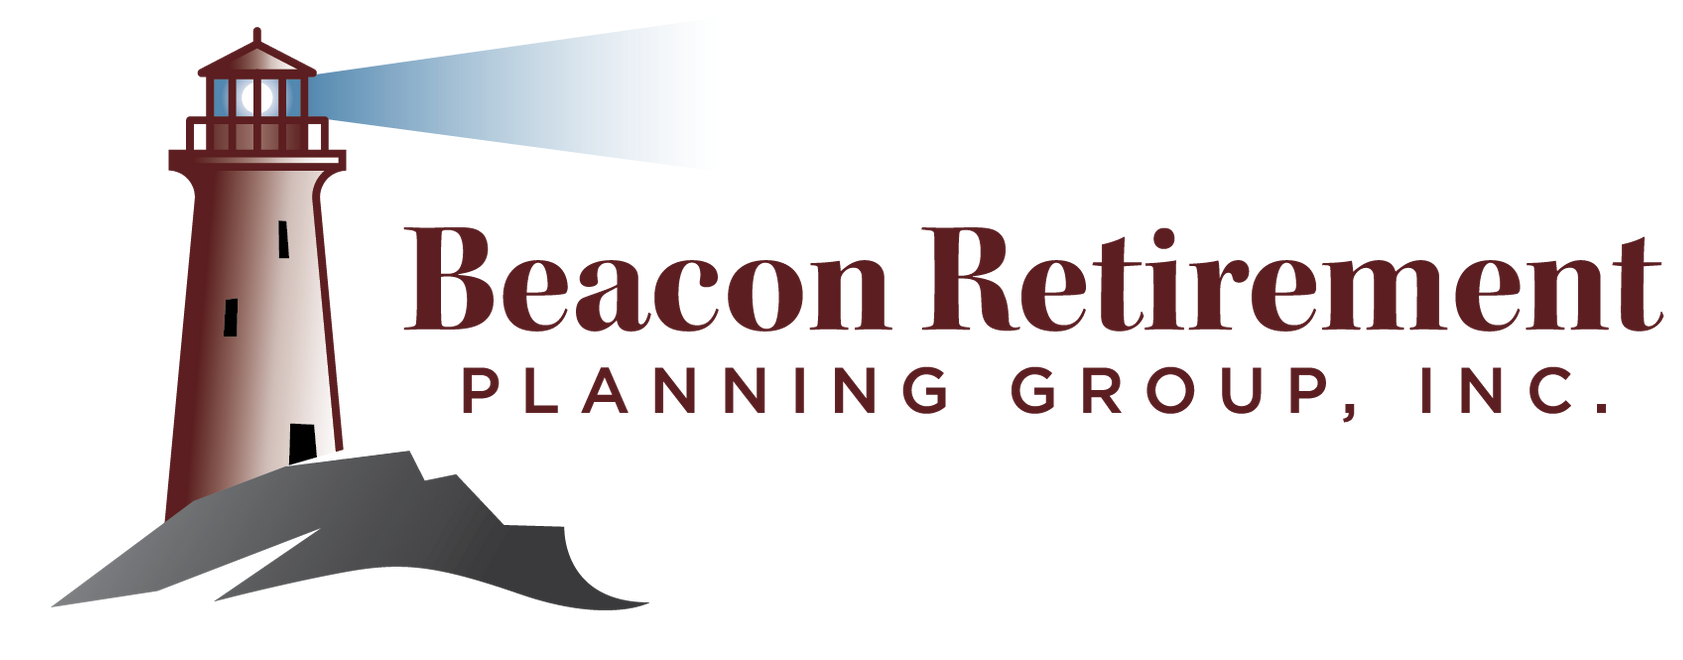 Beacon Retirement Planning Group, Inc. The Retirement Income Specialists